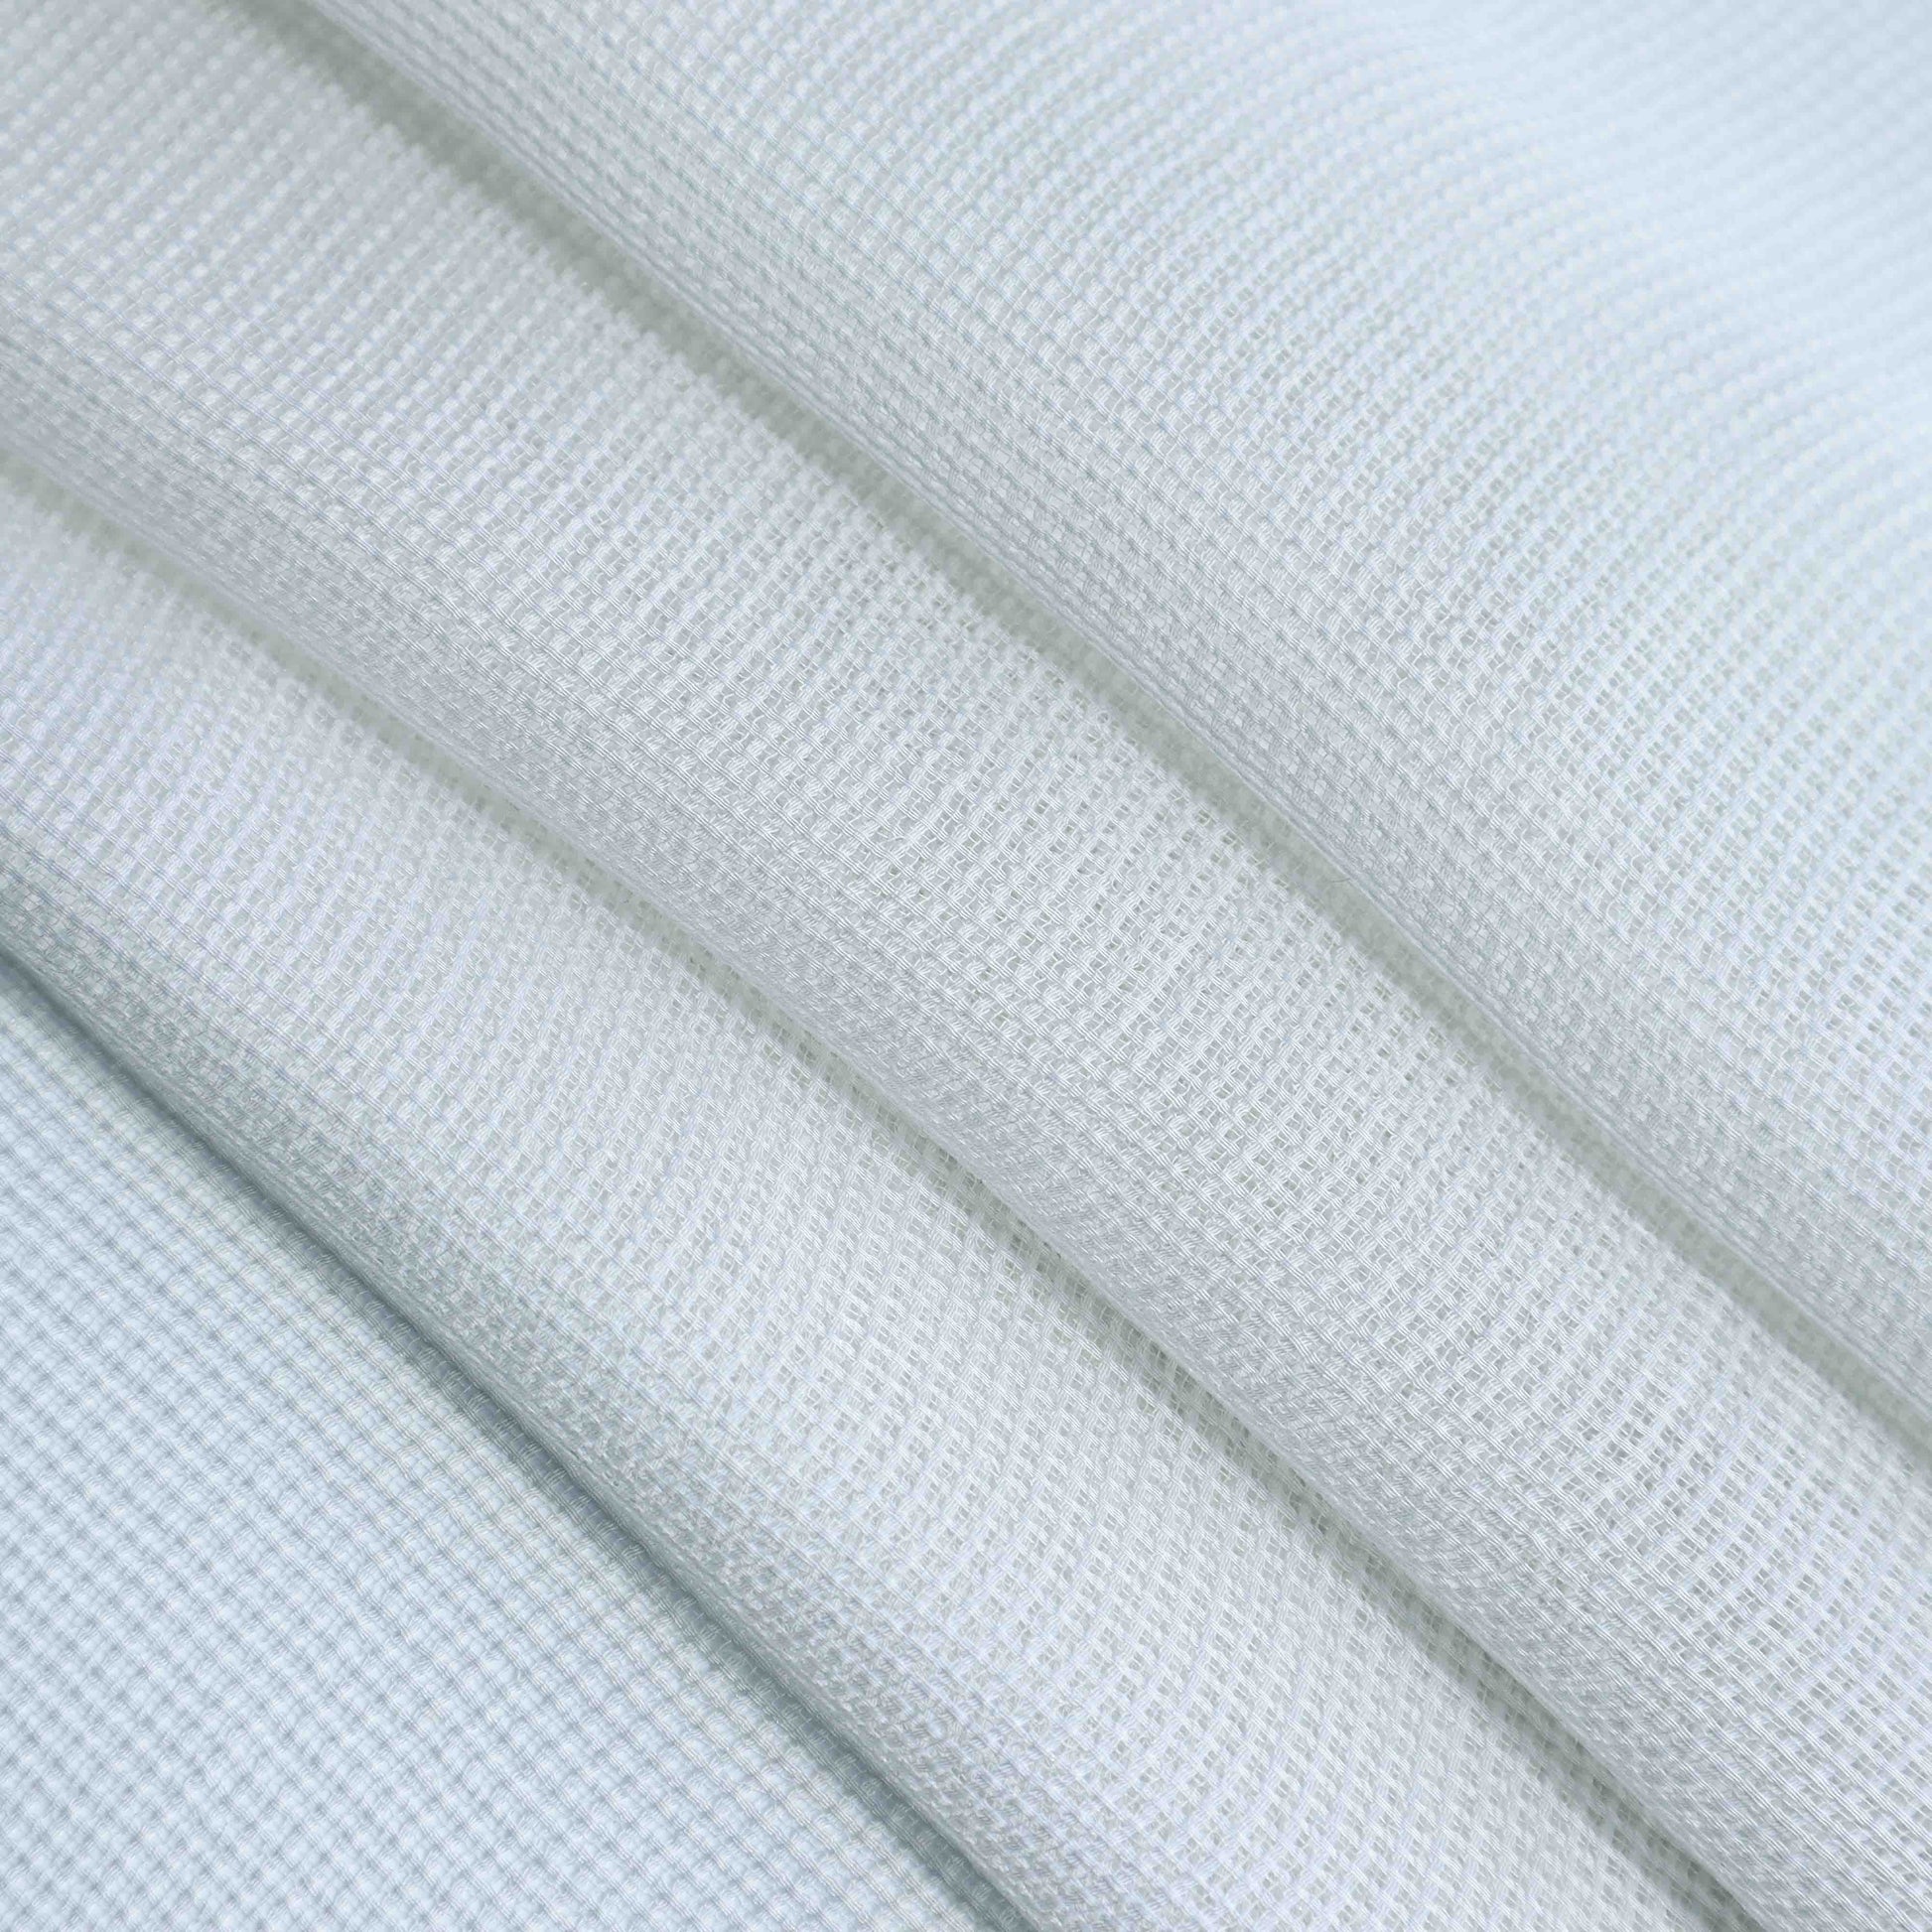 A lightweight Polyester Cotton fabric in Meshmellow. This ultralight mesh fabric comes with an incredibly smooth and cool hand feel.